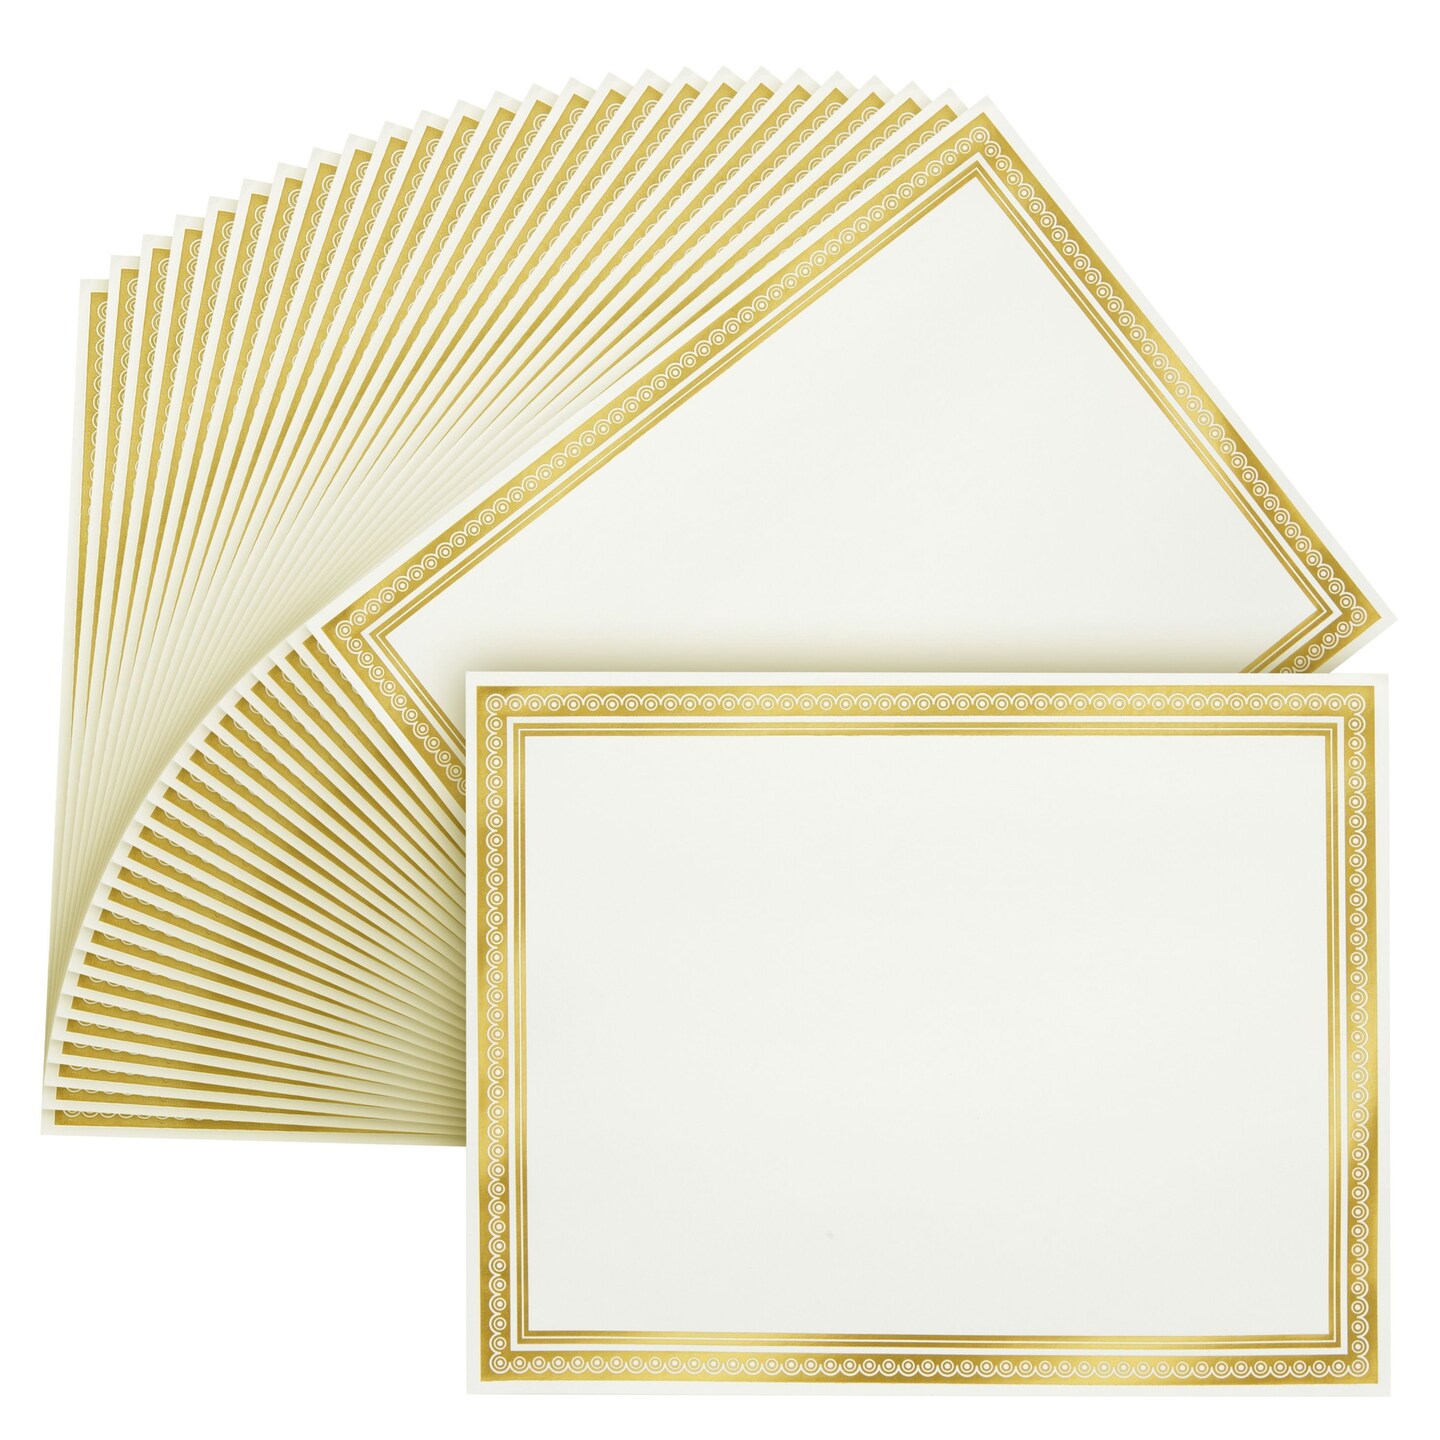 50 Sheets Gold Foil Award Certificate Paper 8.5 x 11 for Printing - Blank Cardstock for Graduation, Diploma and Achievement (White)